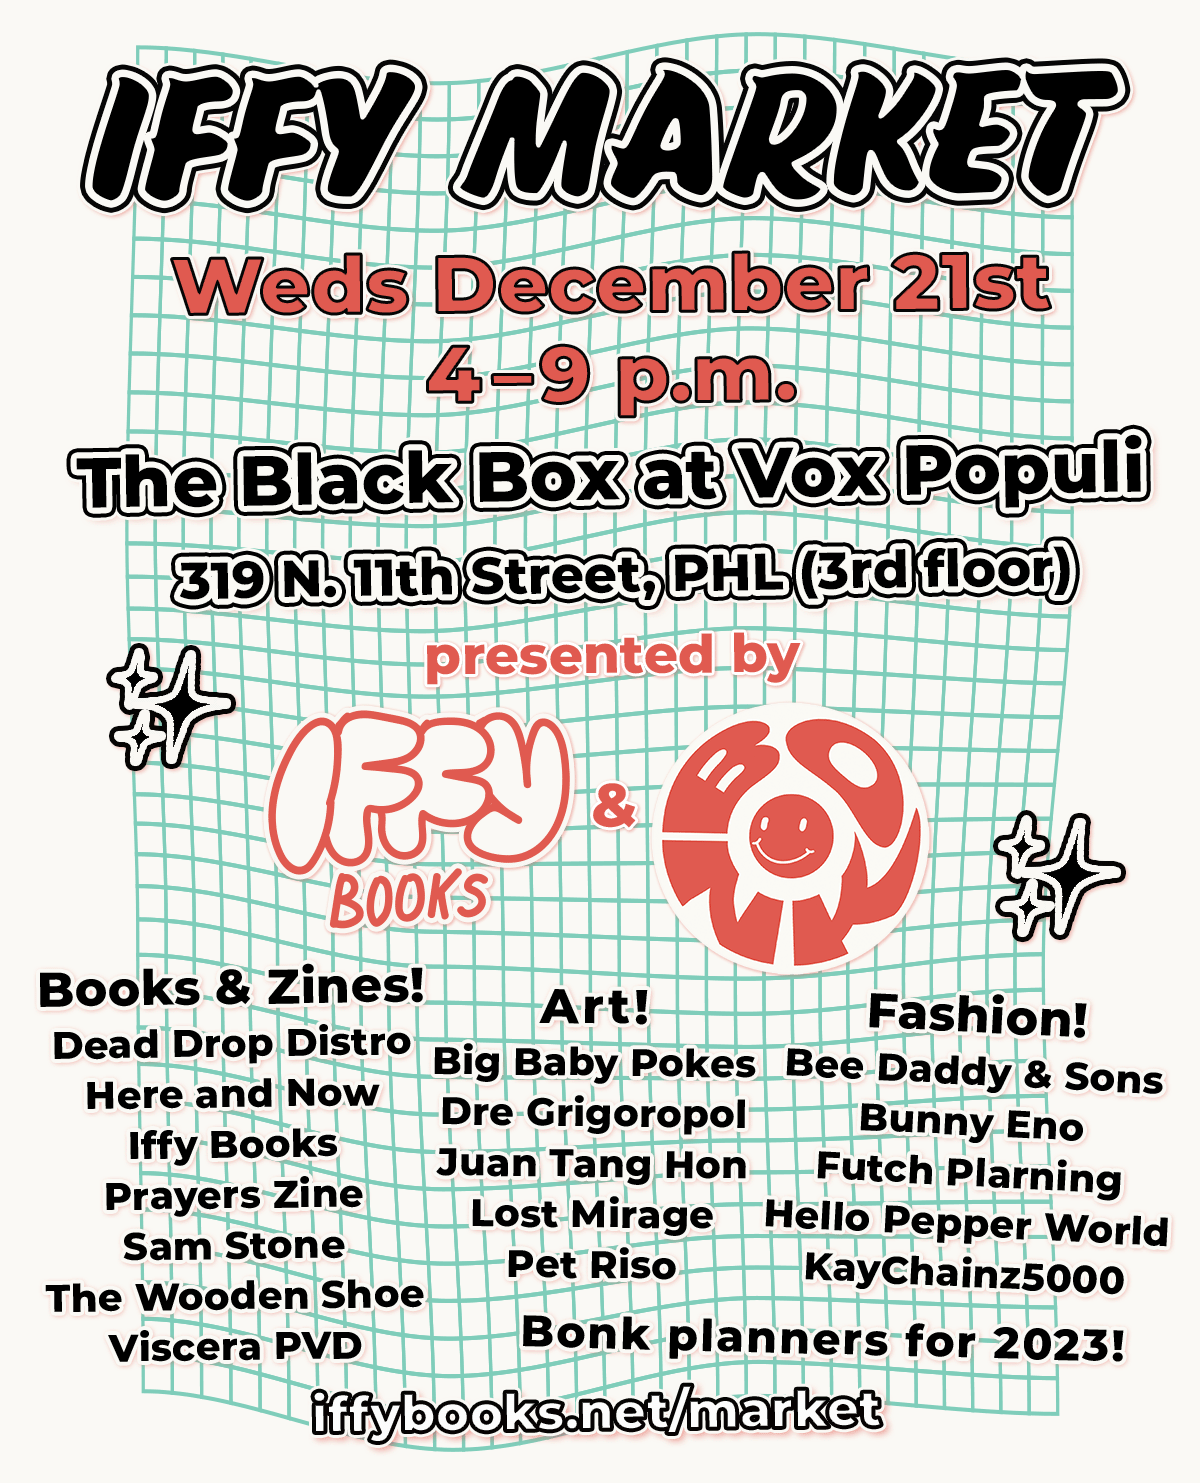 Flyer with a wavy green grid in the background and the following text: IFFY MARKET Weds December 21st 4–9 p.m. The Black Box at Vox Populi 319 N. 11th Street, PHL (3rd floor) presented by Iffy Books & Bonk Books & Zines! Dead Drop Distro Here and Now Zines Iffy Books Prayers Zine Sam Stone The Wooden Shoe Viscera PVD Art! Big Baby Pokes Dre Grigoropol Juan Tang Hon Lost Mirage Pet Riso Fashion! Bee Daddy & Sons Bunny Eno Futch Plarning Hello Pepper World KayChainz5000 2023 planners from Bonk! iffybooks.net/market